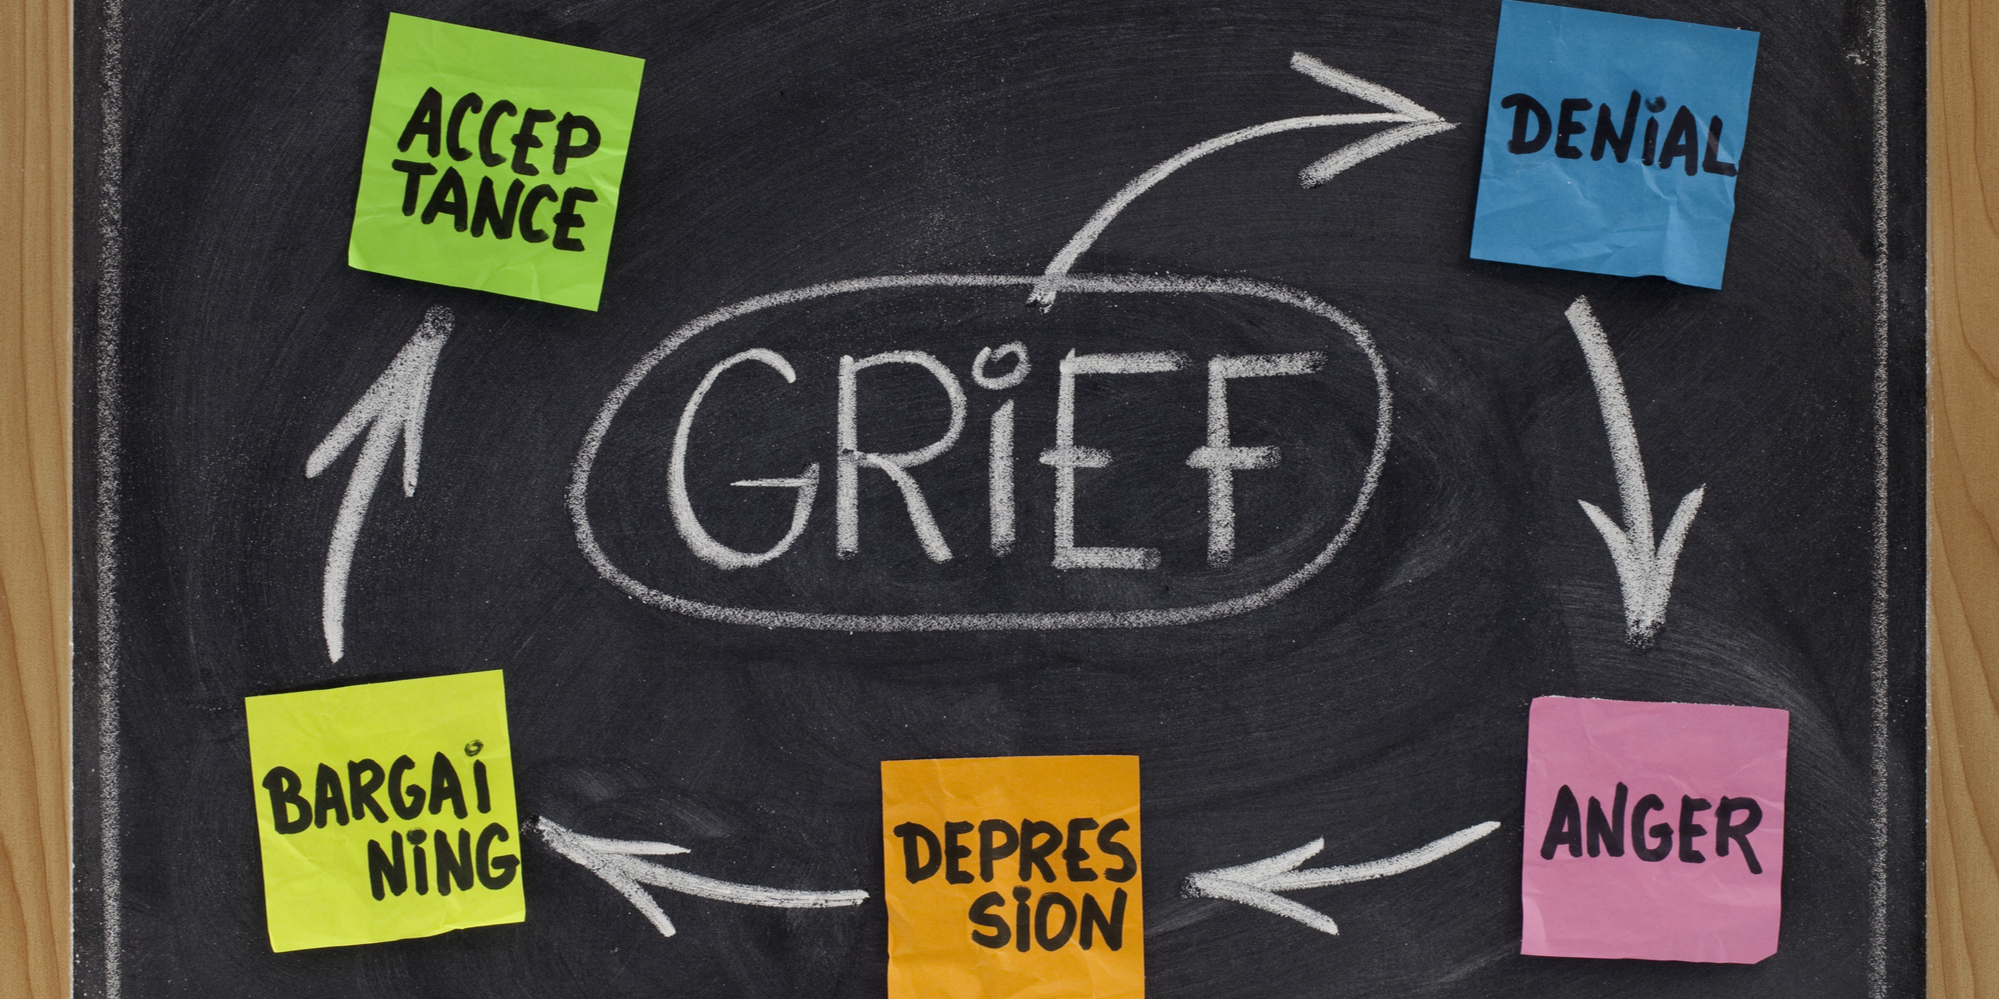 stages of grief